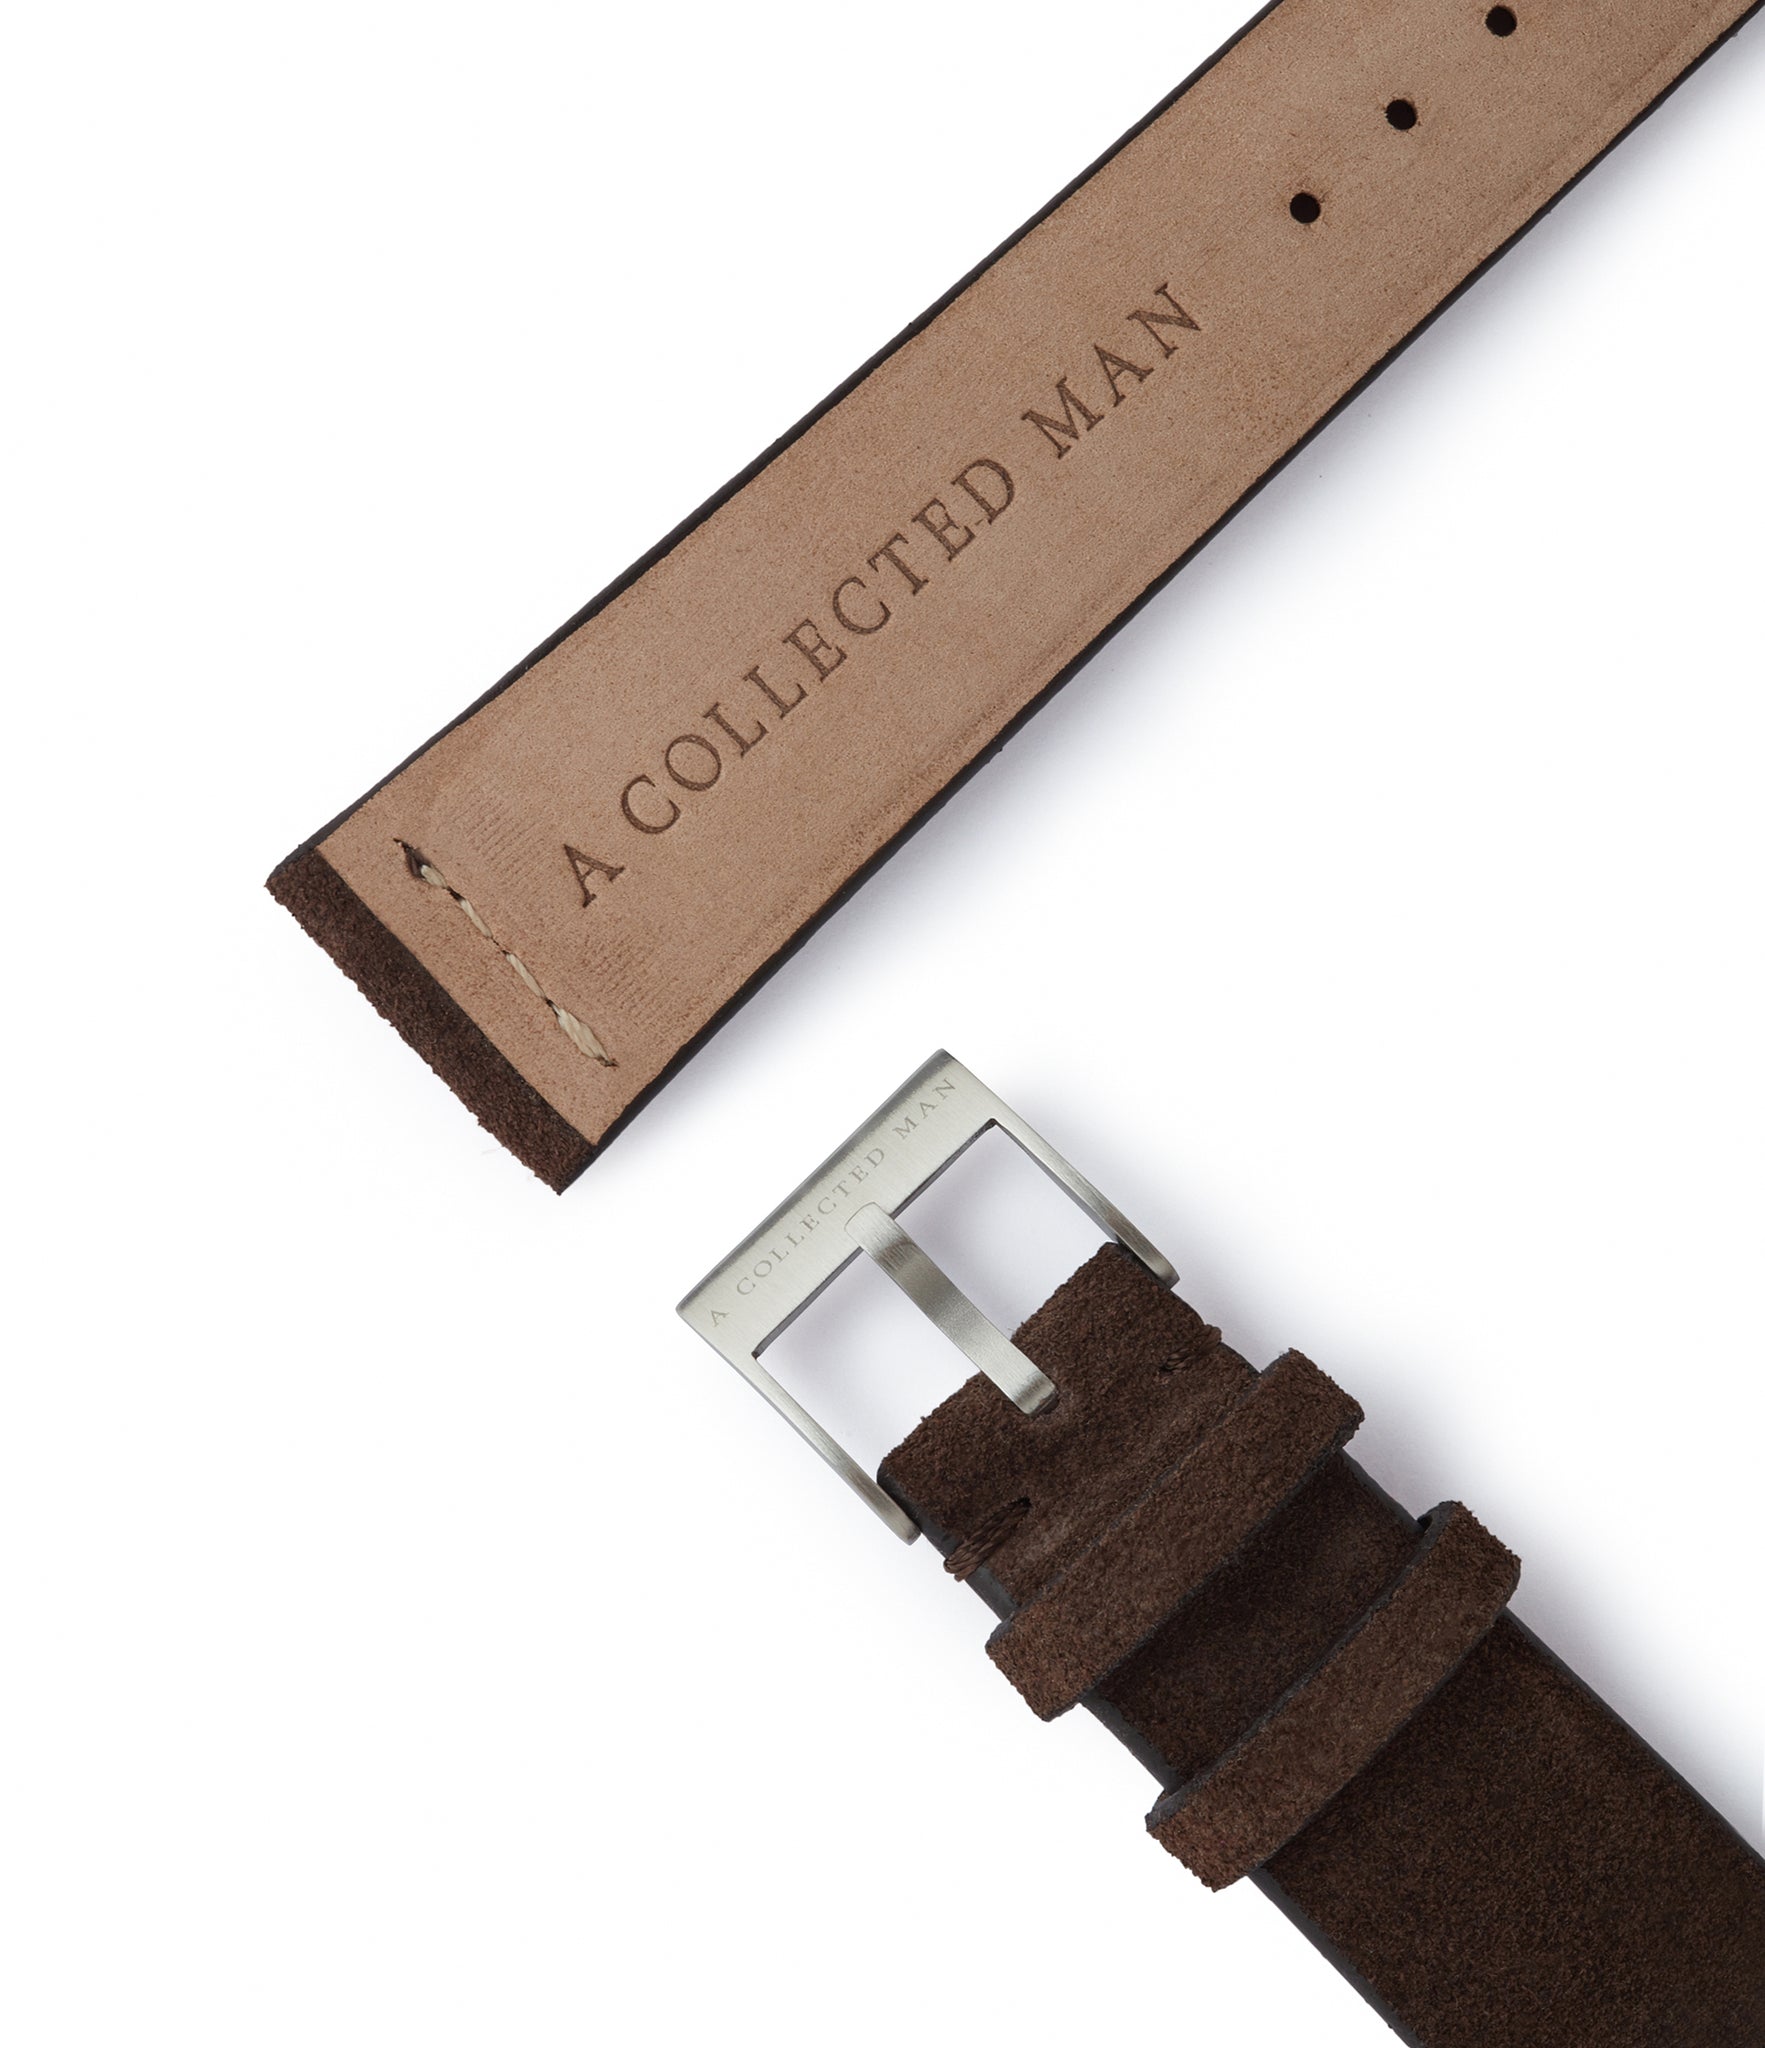 Buy suede quality watch strap in dark roast brown from A Collected Man London, in short or regular lengths. We are proud to offer these hand-crafted watch straps, thoughtfully made in Europe, to suit your watch. Available to order online for worldwide delivery.